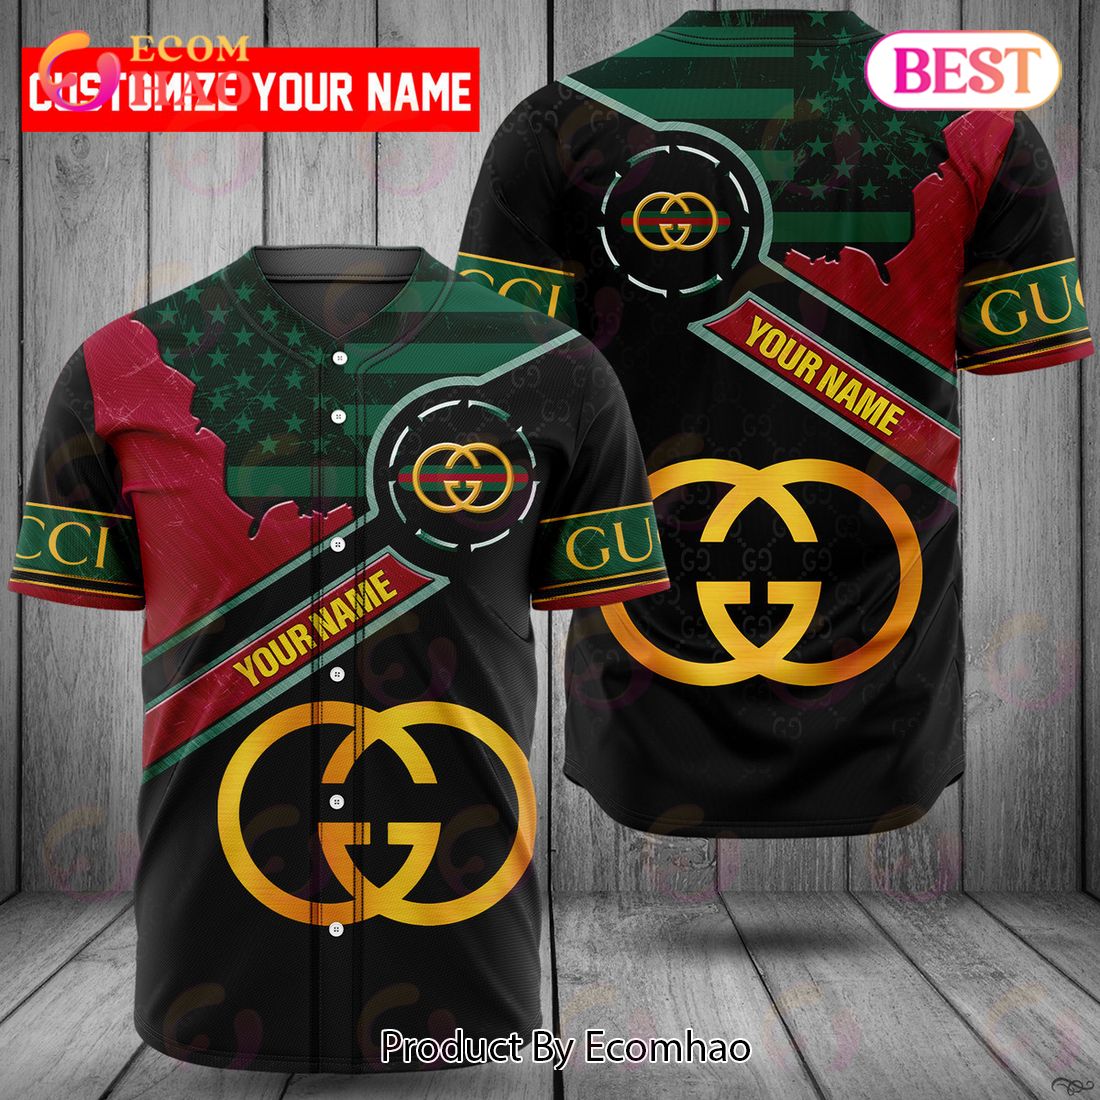 Gucci Printing American Flag Motifs Luxury Brand Jersey Limited Edition